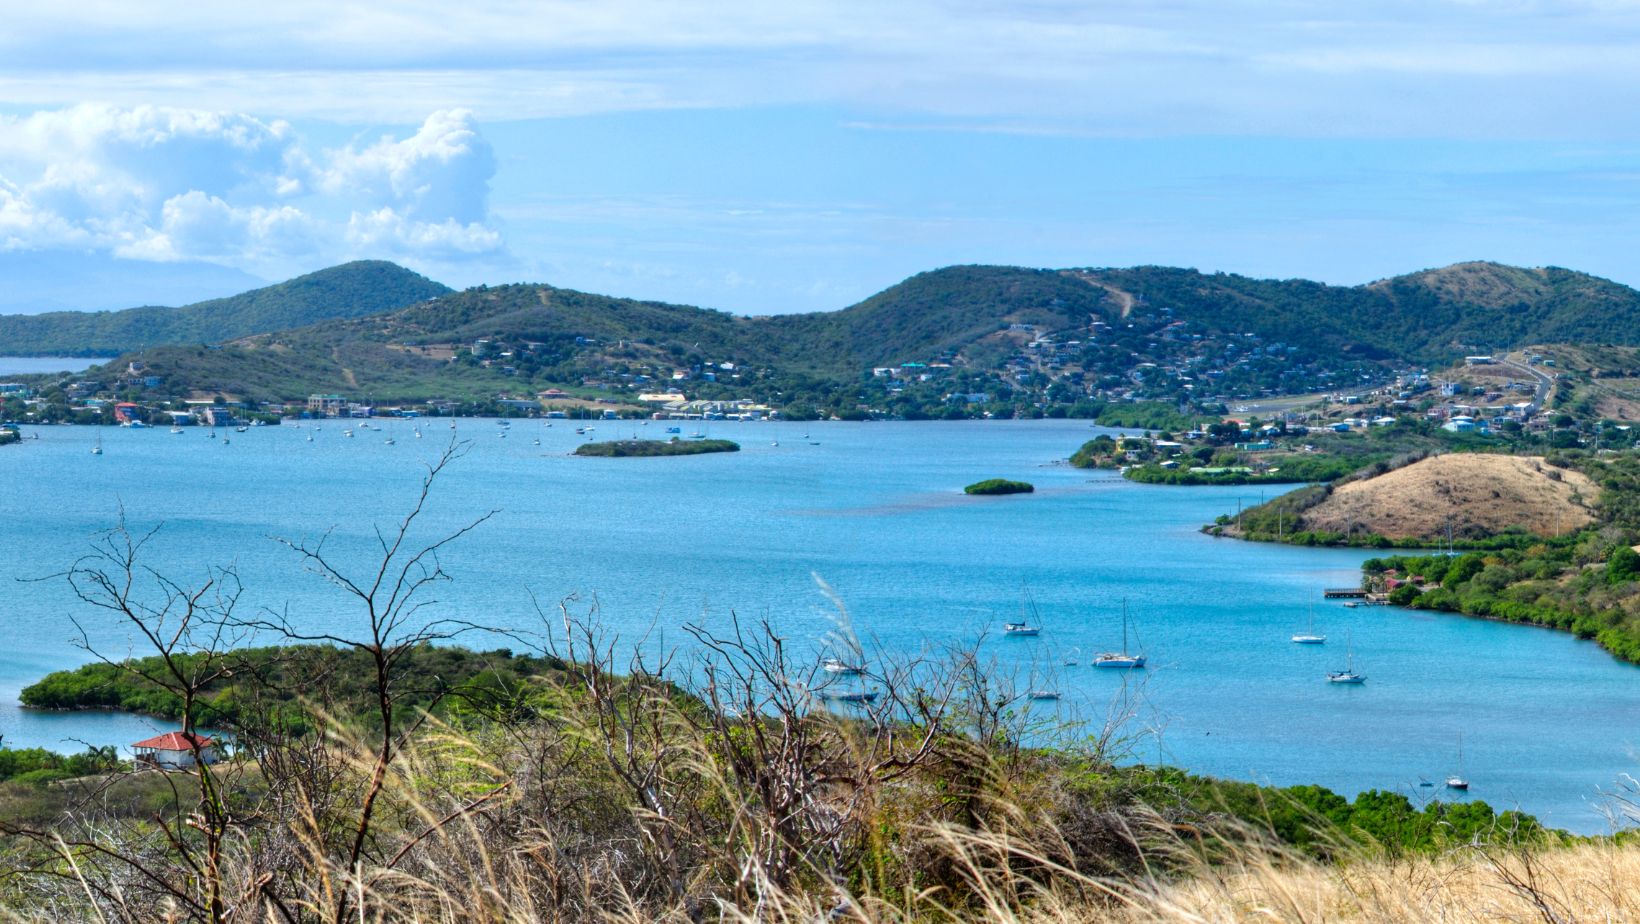 Discover this tranquil bay's perfect conditions for sailing, kayaking, and snorkeling, and explore the natural wonders of Culebra from this idyllic base.